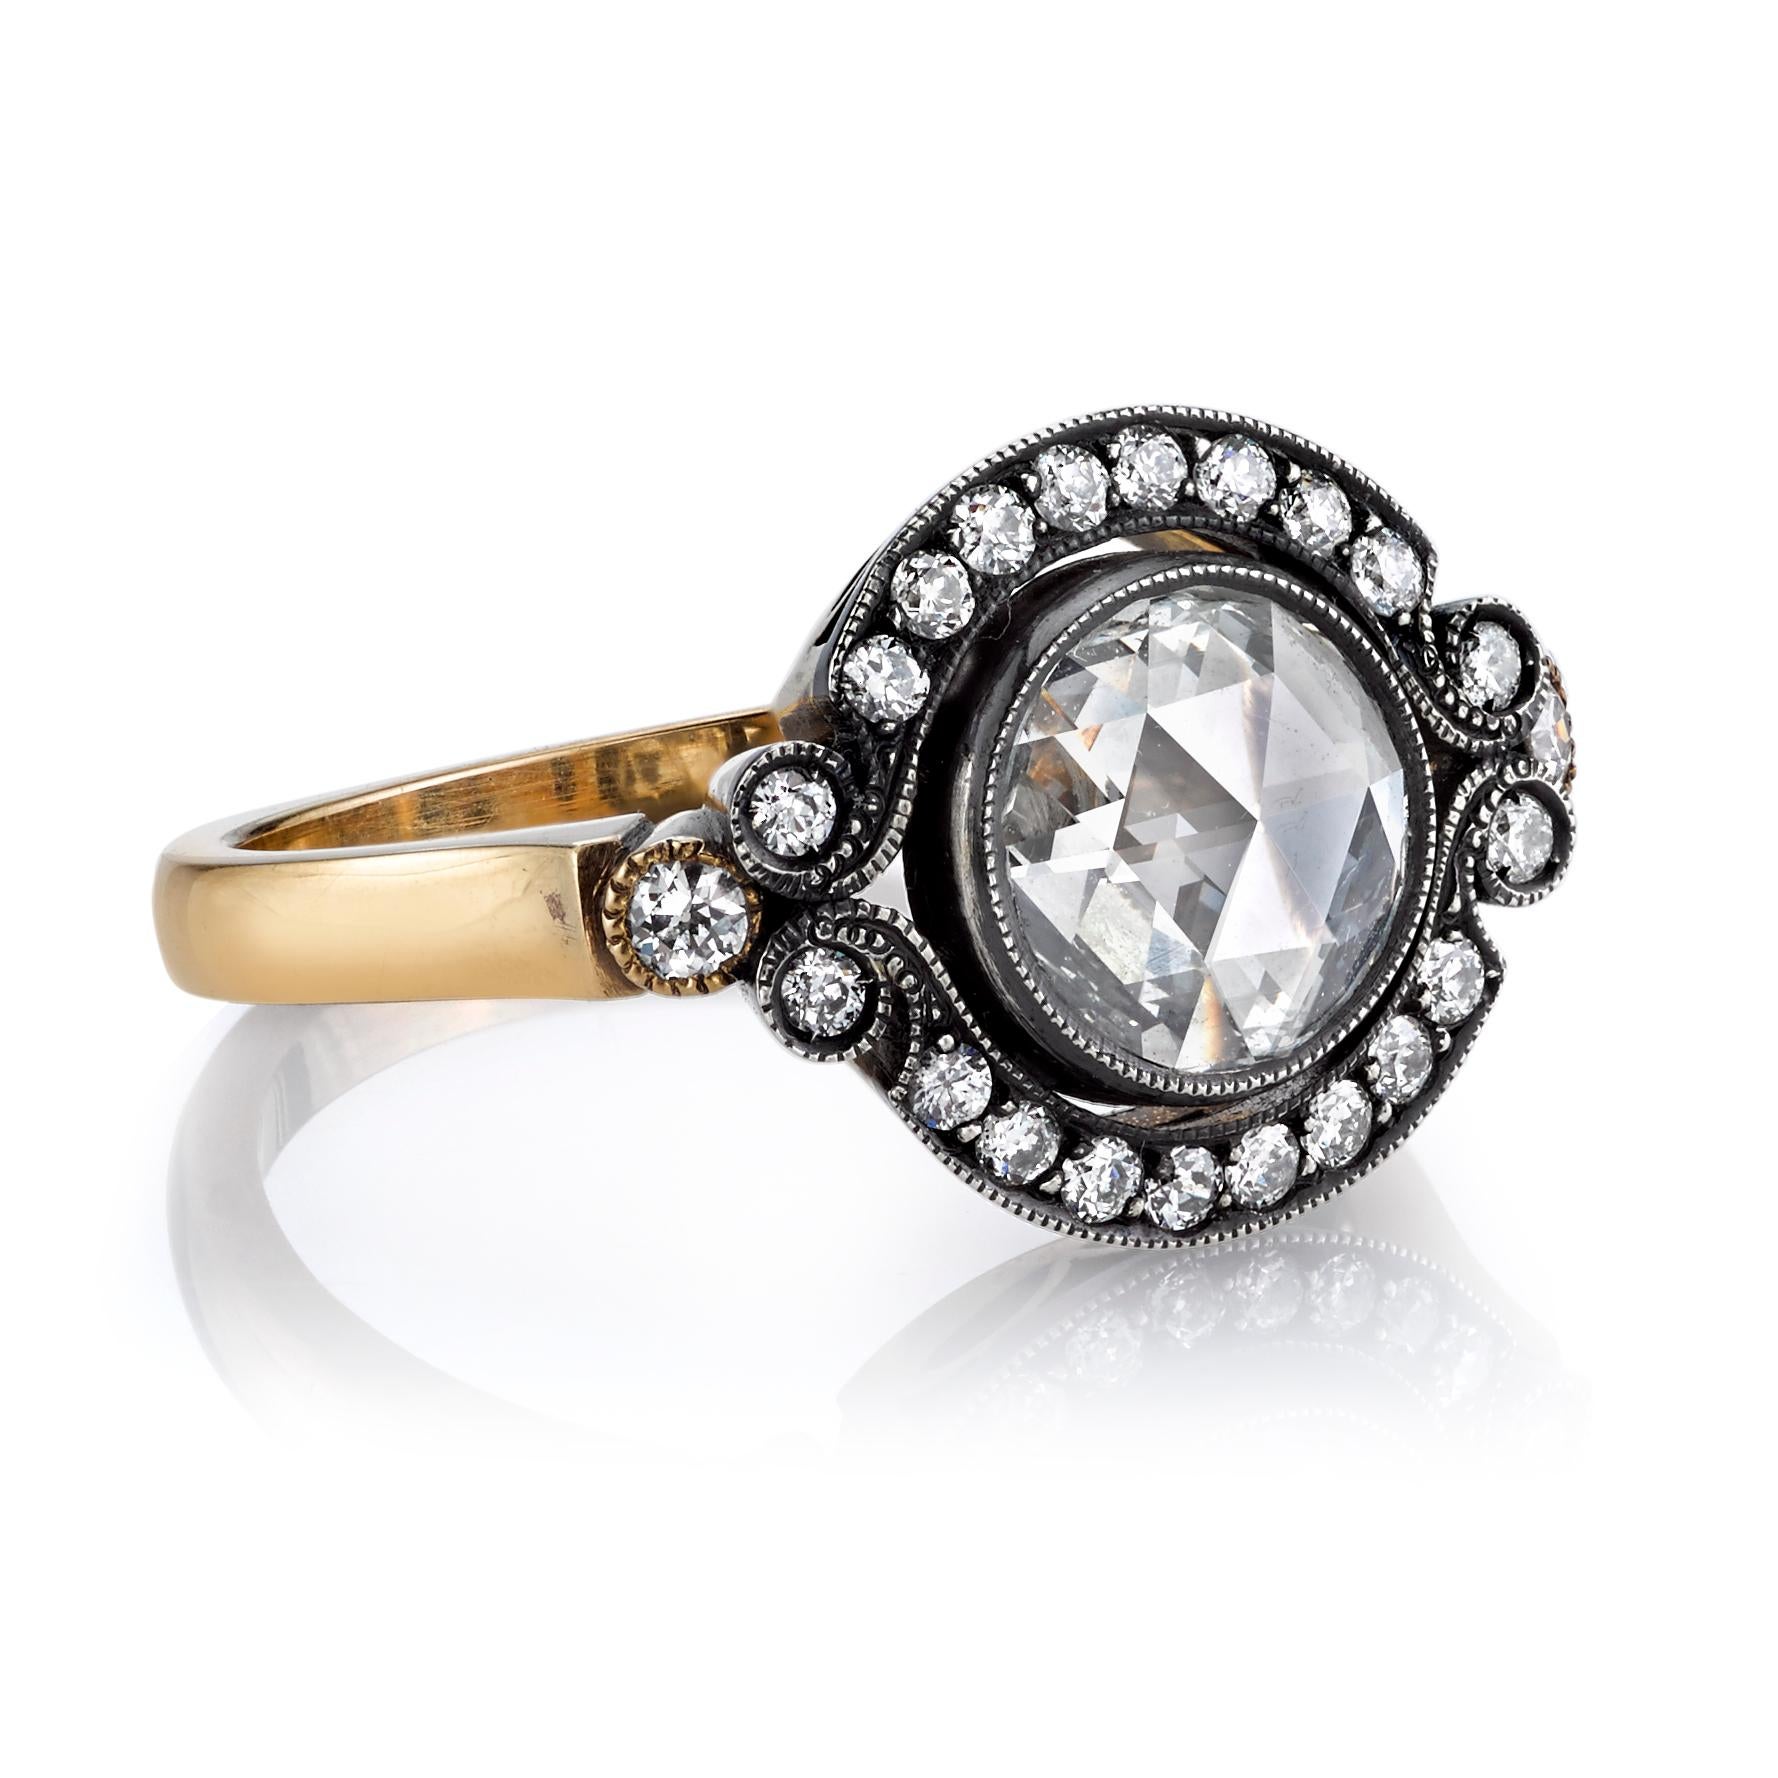 0.75ct G/SI1 EGL certified Rose cut diamond set in a handcrafted 18K yellow gold mounting. The center stone along with 0.29ctw old European cut accent diamonds are set in an oxidized silver head with a millgrained edge.

Ring is currently a size 6